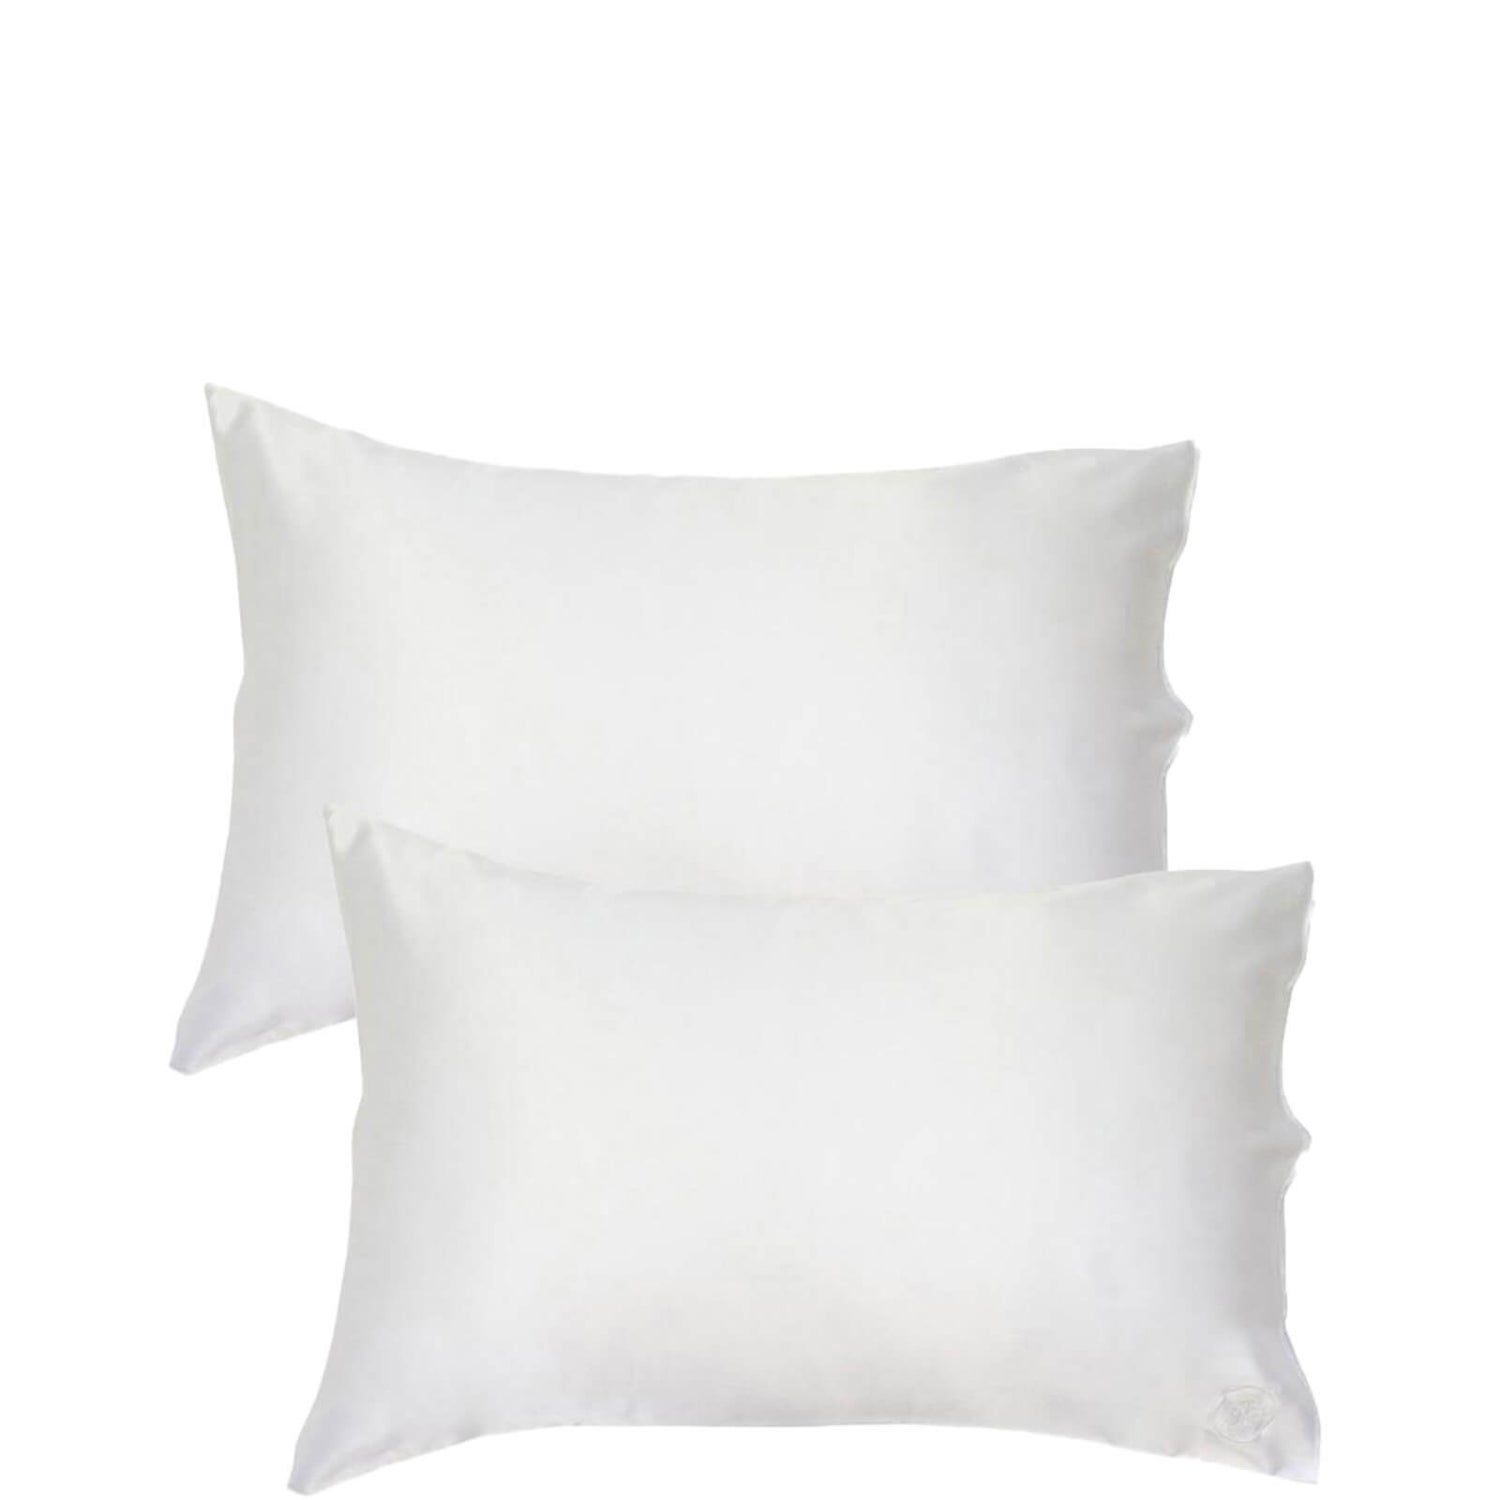 The Goodnight Co. Silk Pillowcase Twin Set Queen Size - White